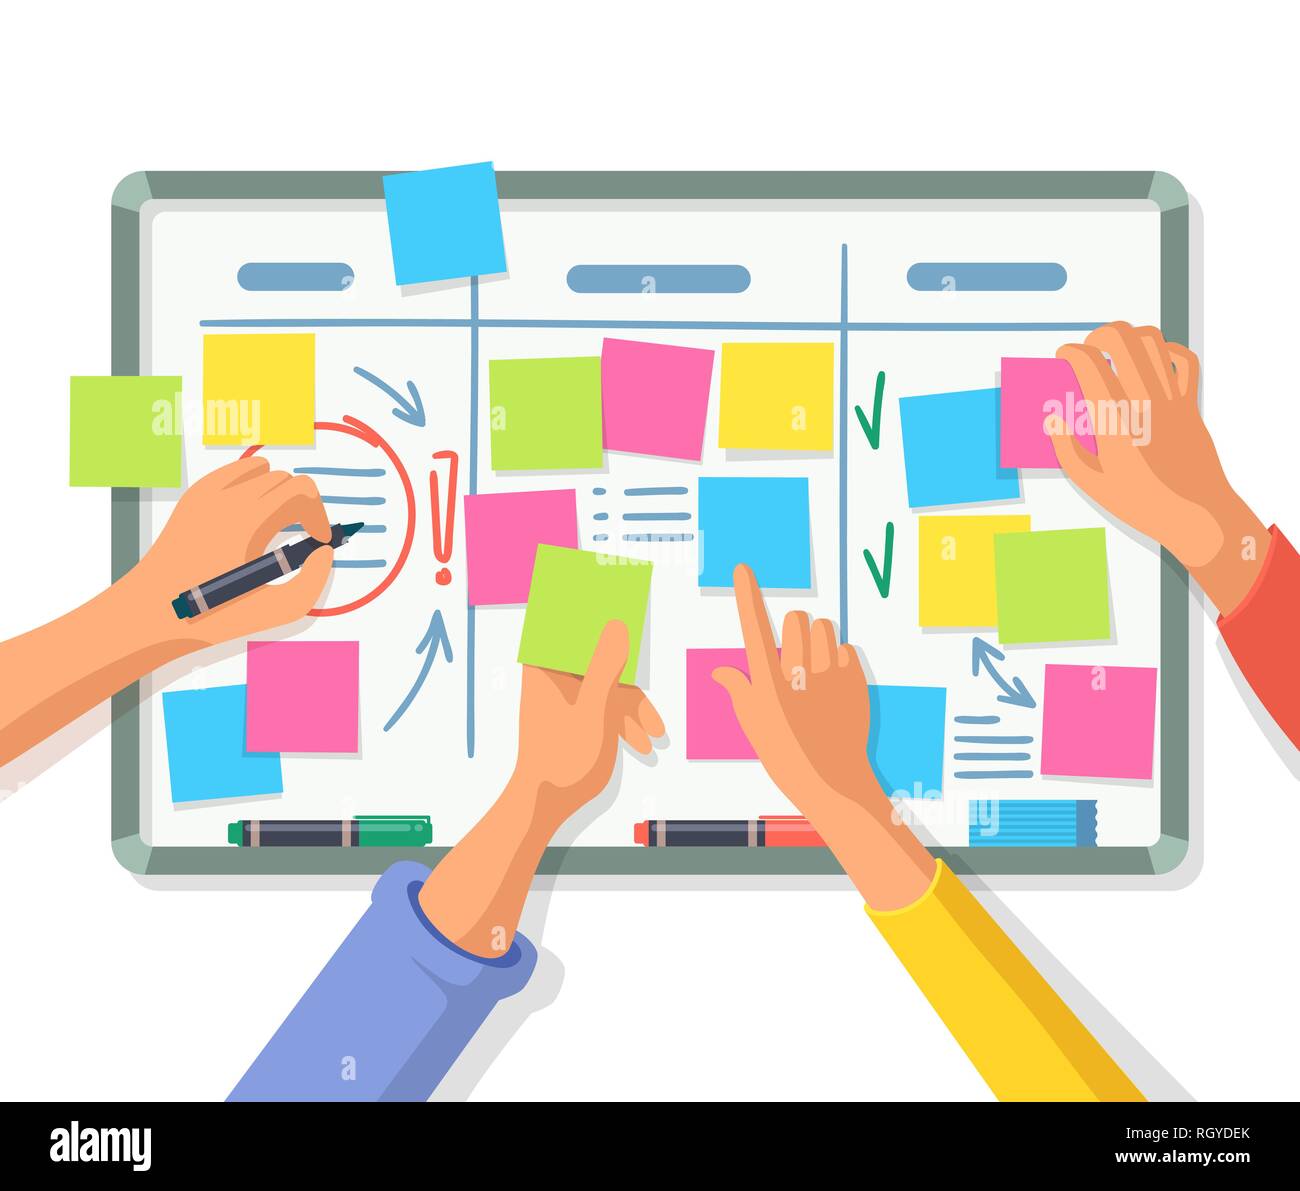 Board with empty stickers or notes, people hands Stock Vector